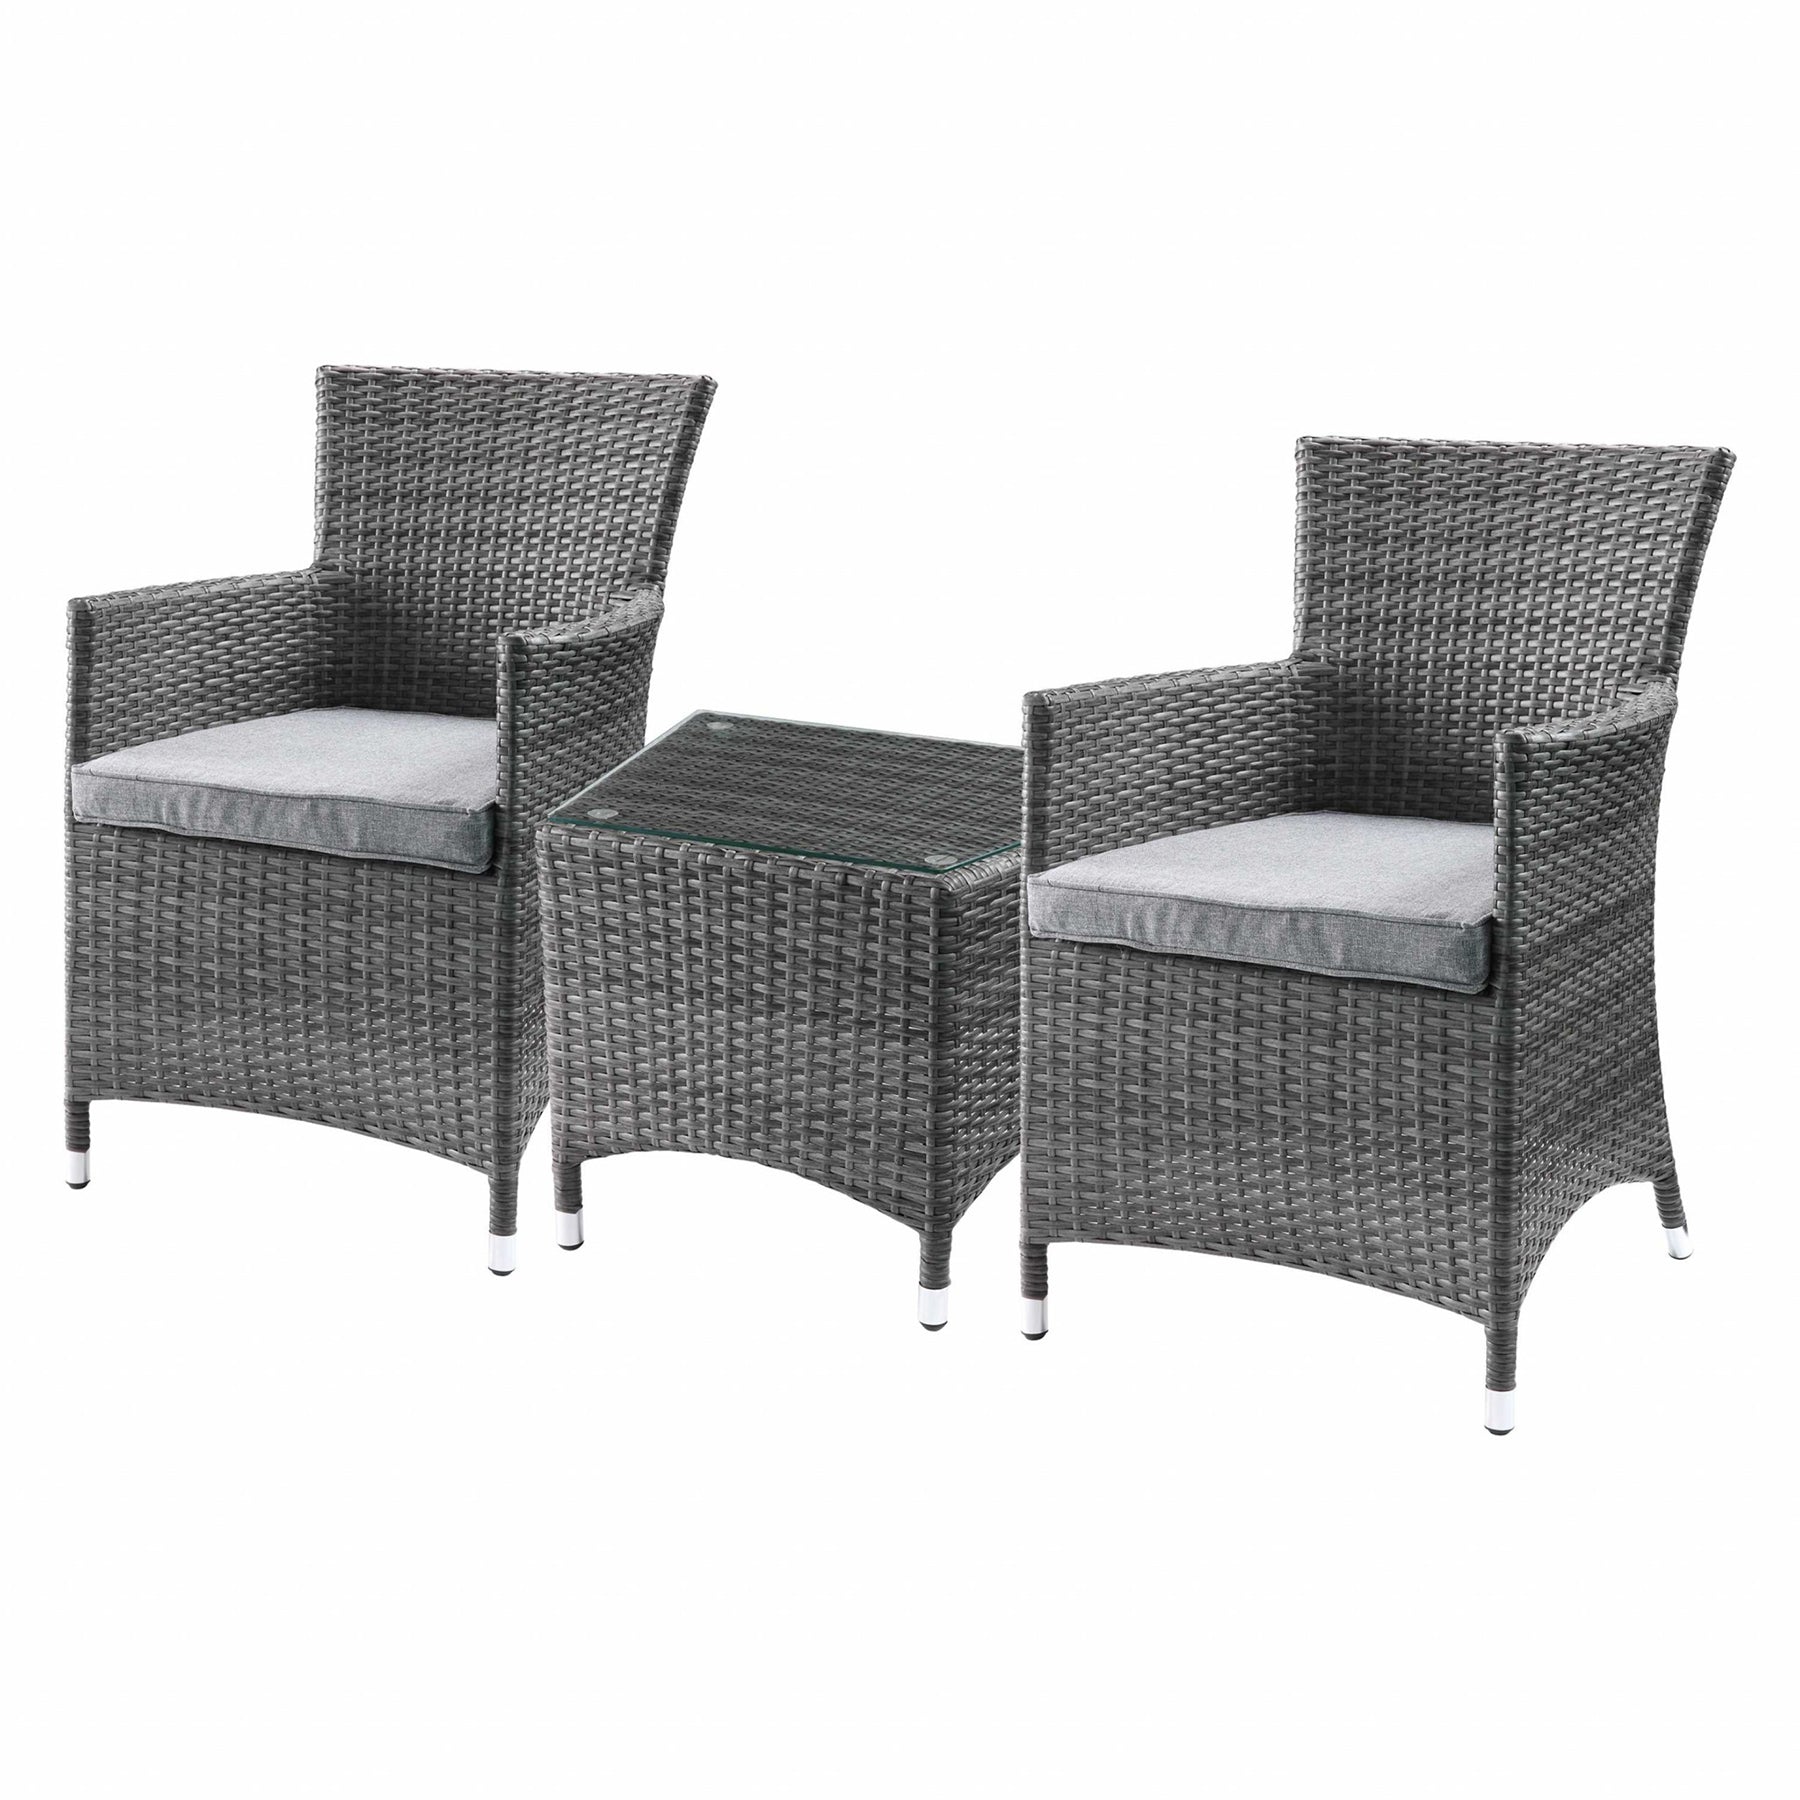 3Pc Wicker Bistro Set - Outdoor Table and Chairs